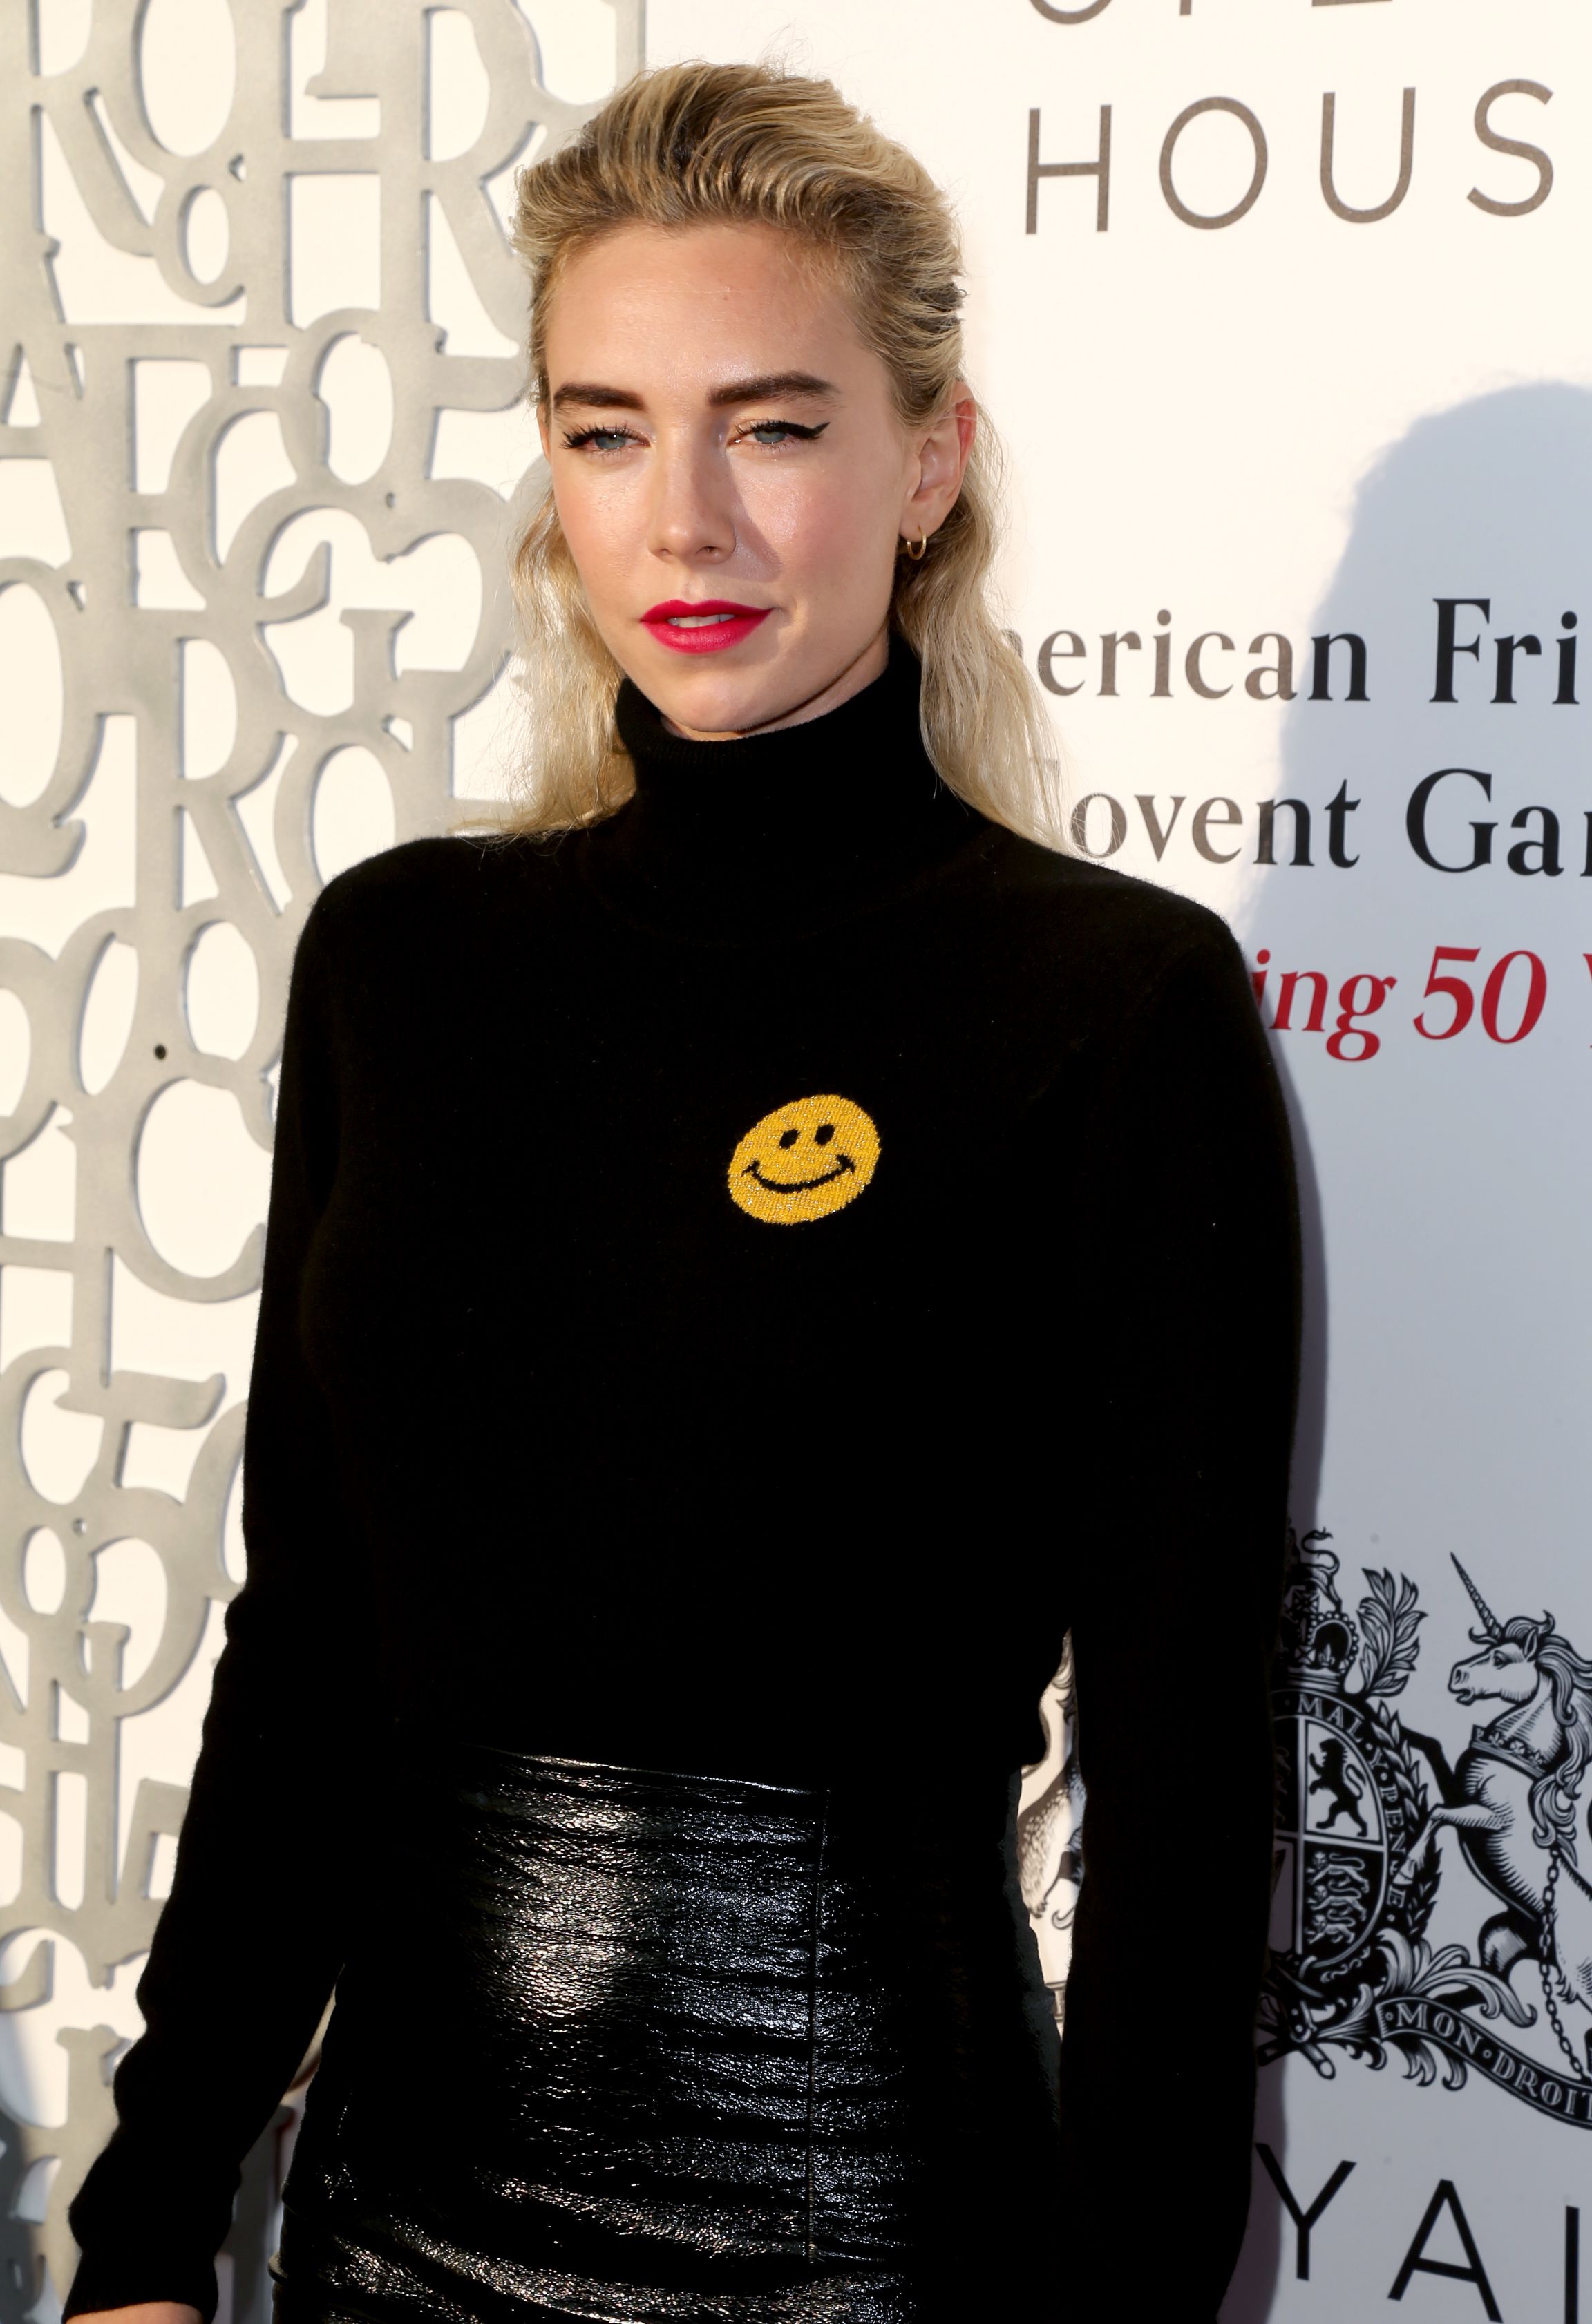 Vanessa Kirby attends American Friends of Covent Garden 50th Anniversary